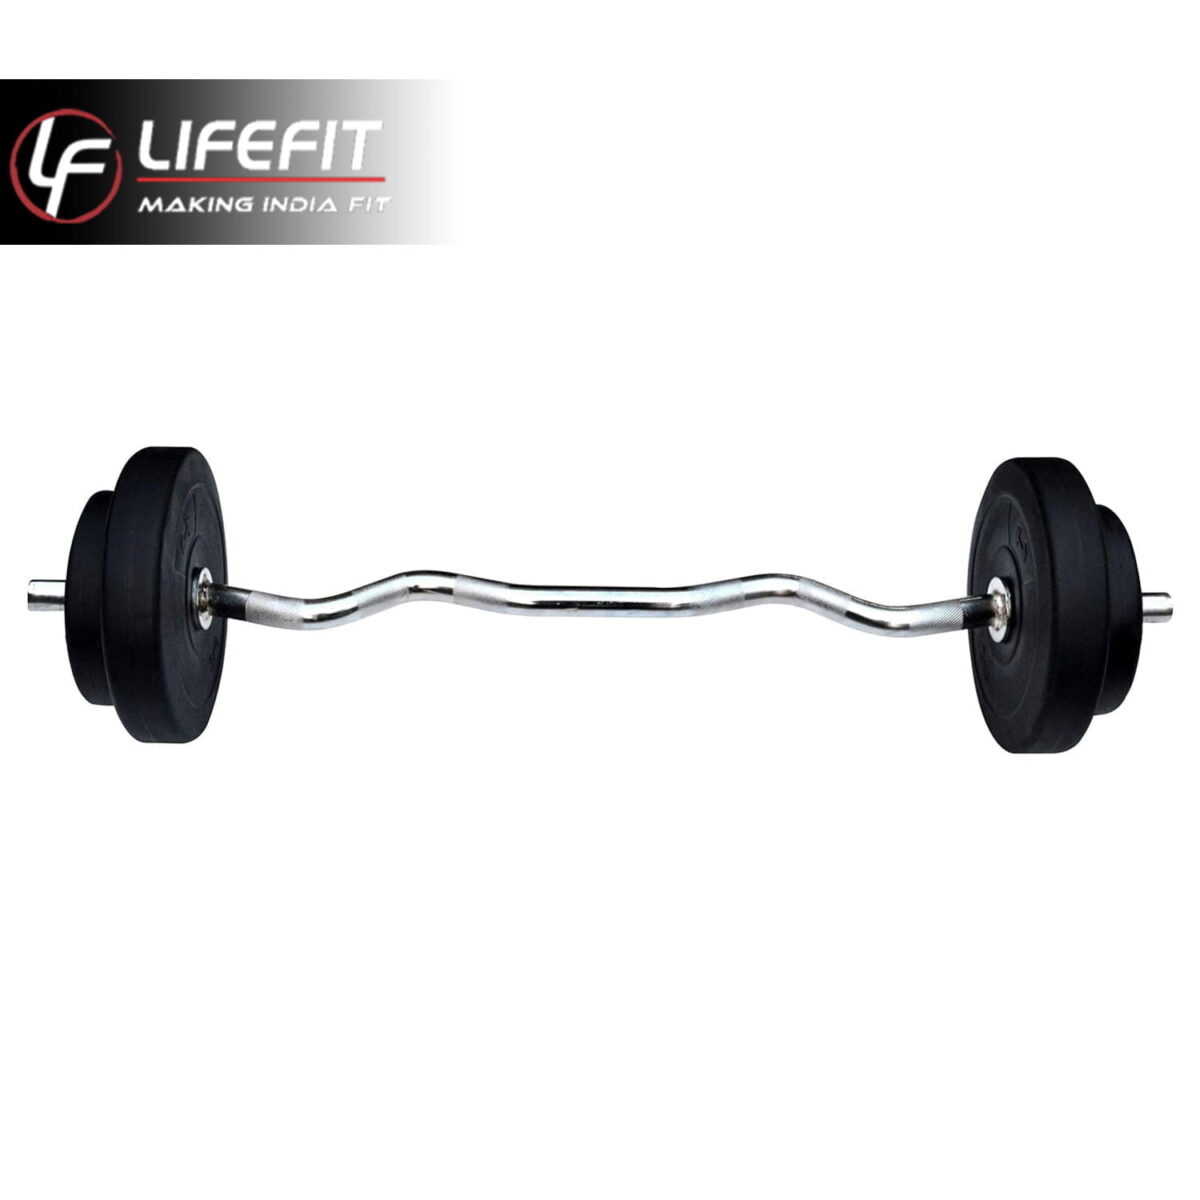 The Life Fit EZ Curl Bar is showcased, featuring the "Life fit" logo, making it an ideal choice for those seeking a quality weightlifting experience.